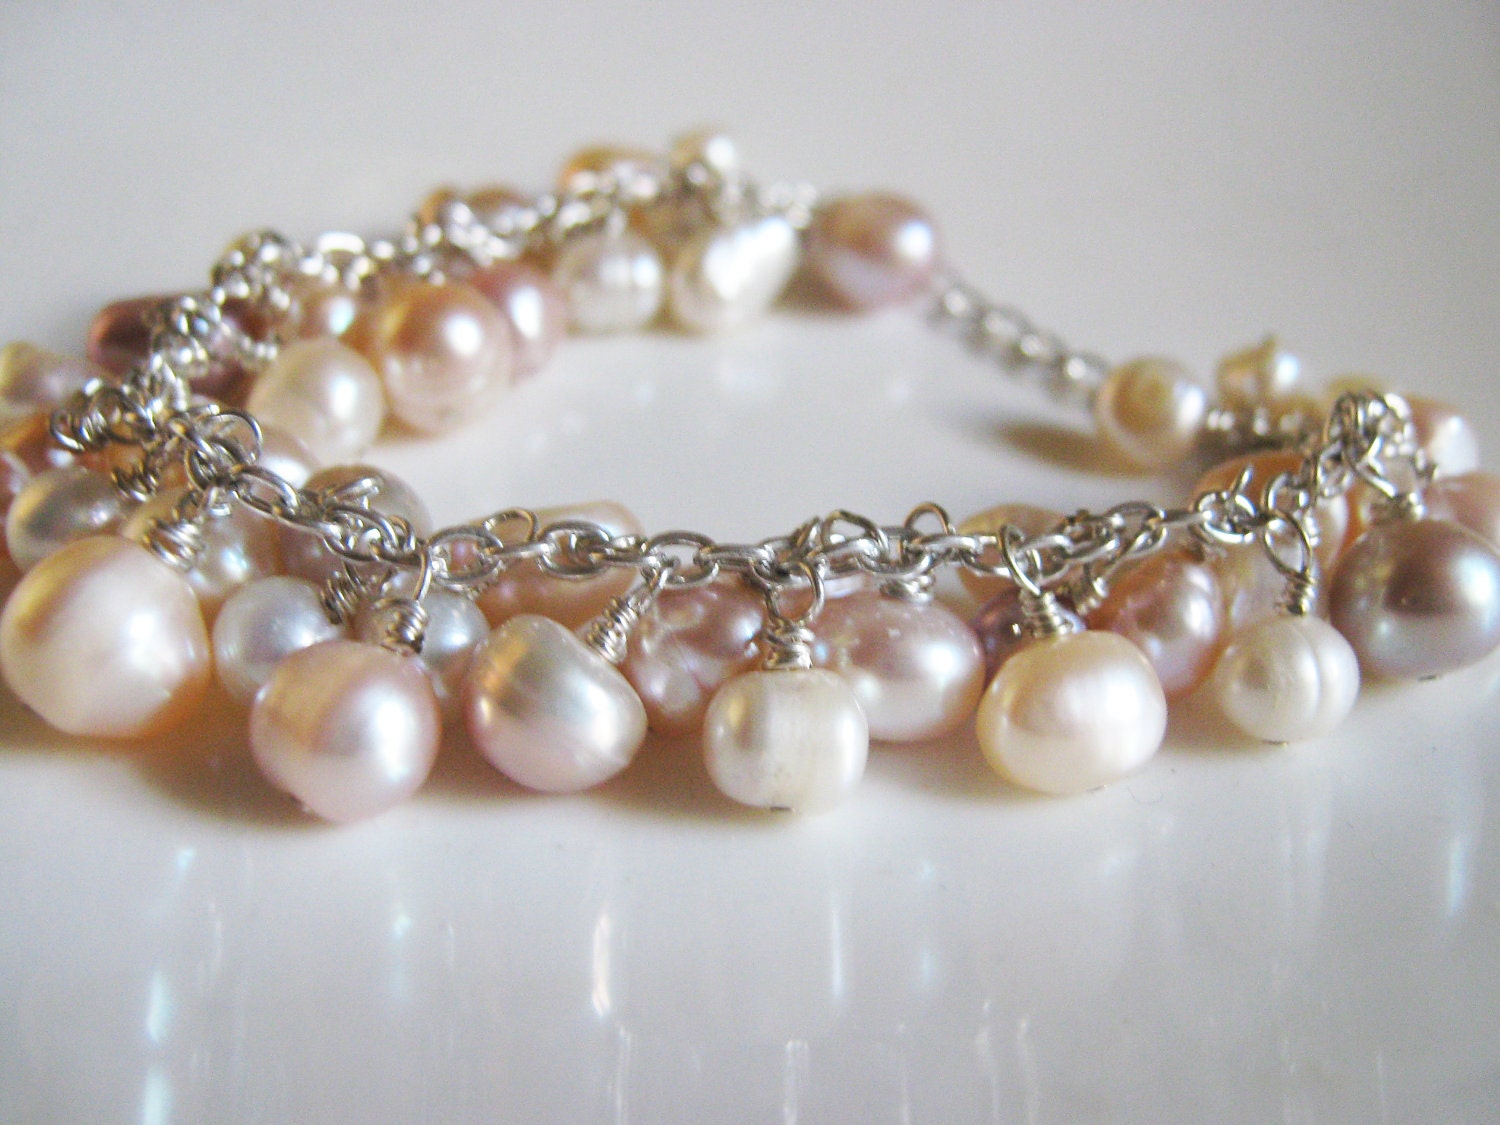 Freshwater Pearl Cluster Bracelet in Peach, white, cream, and mauve